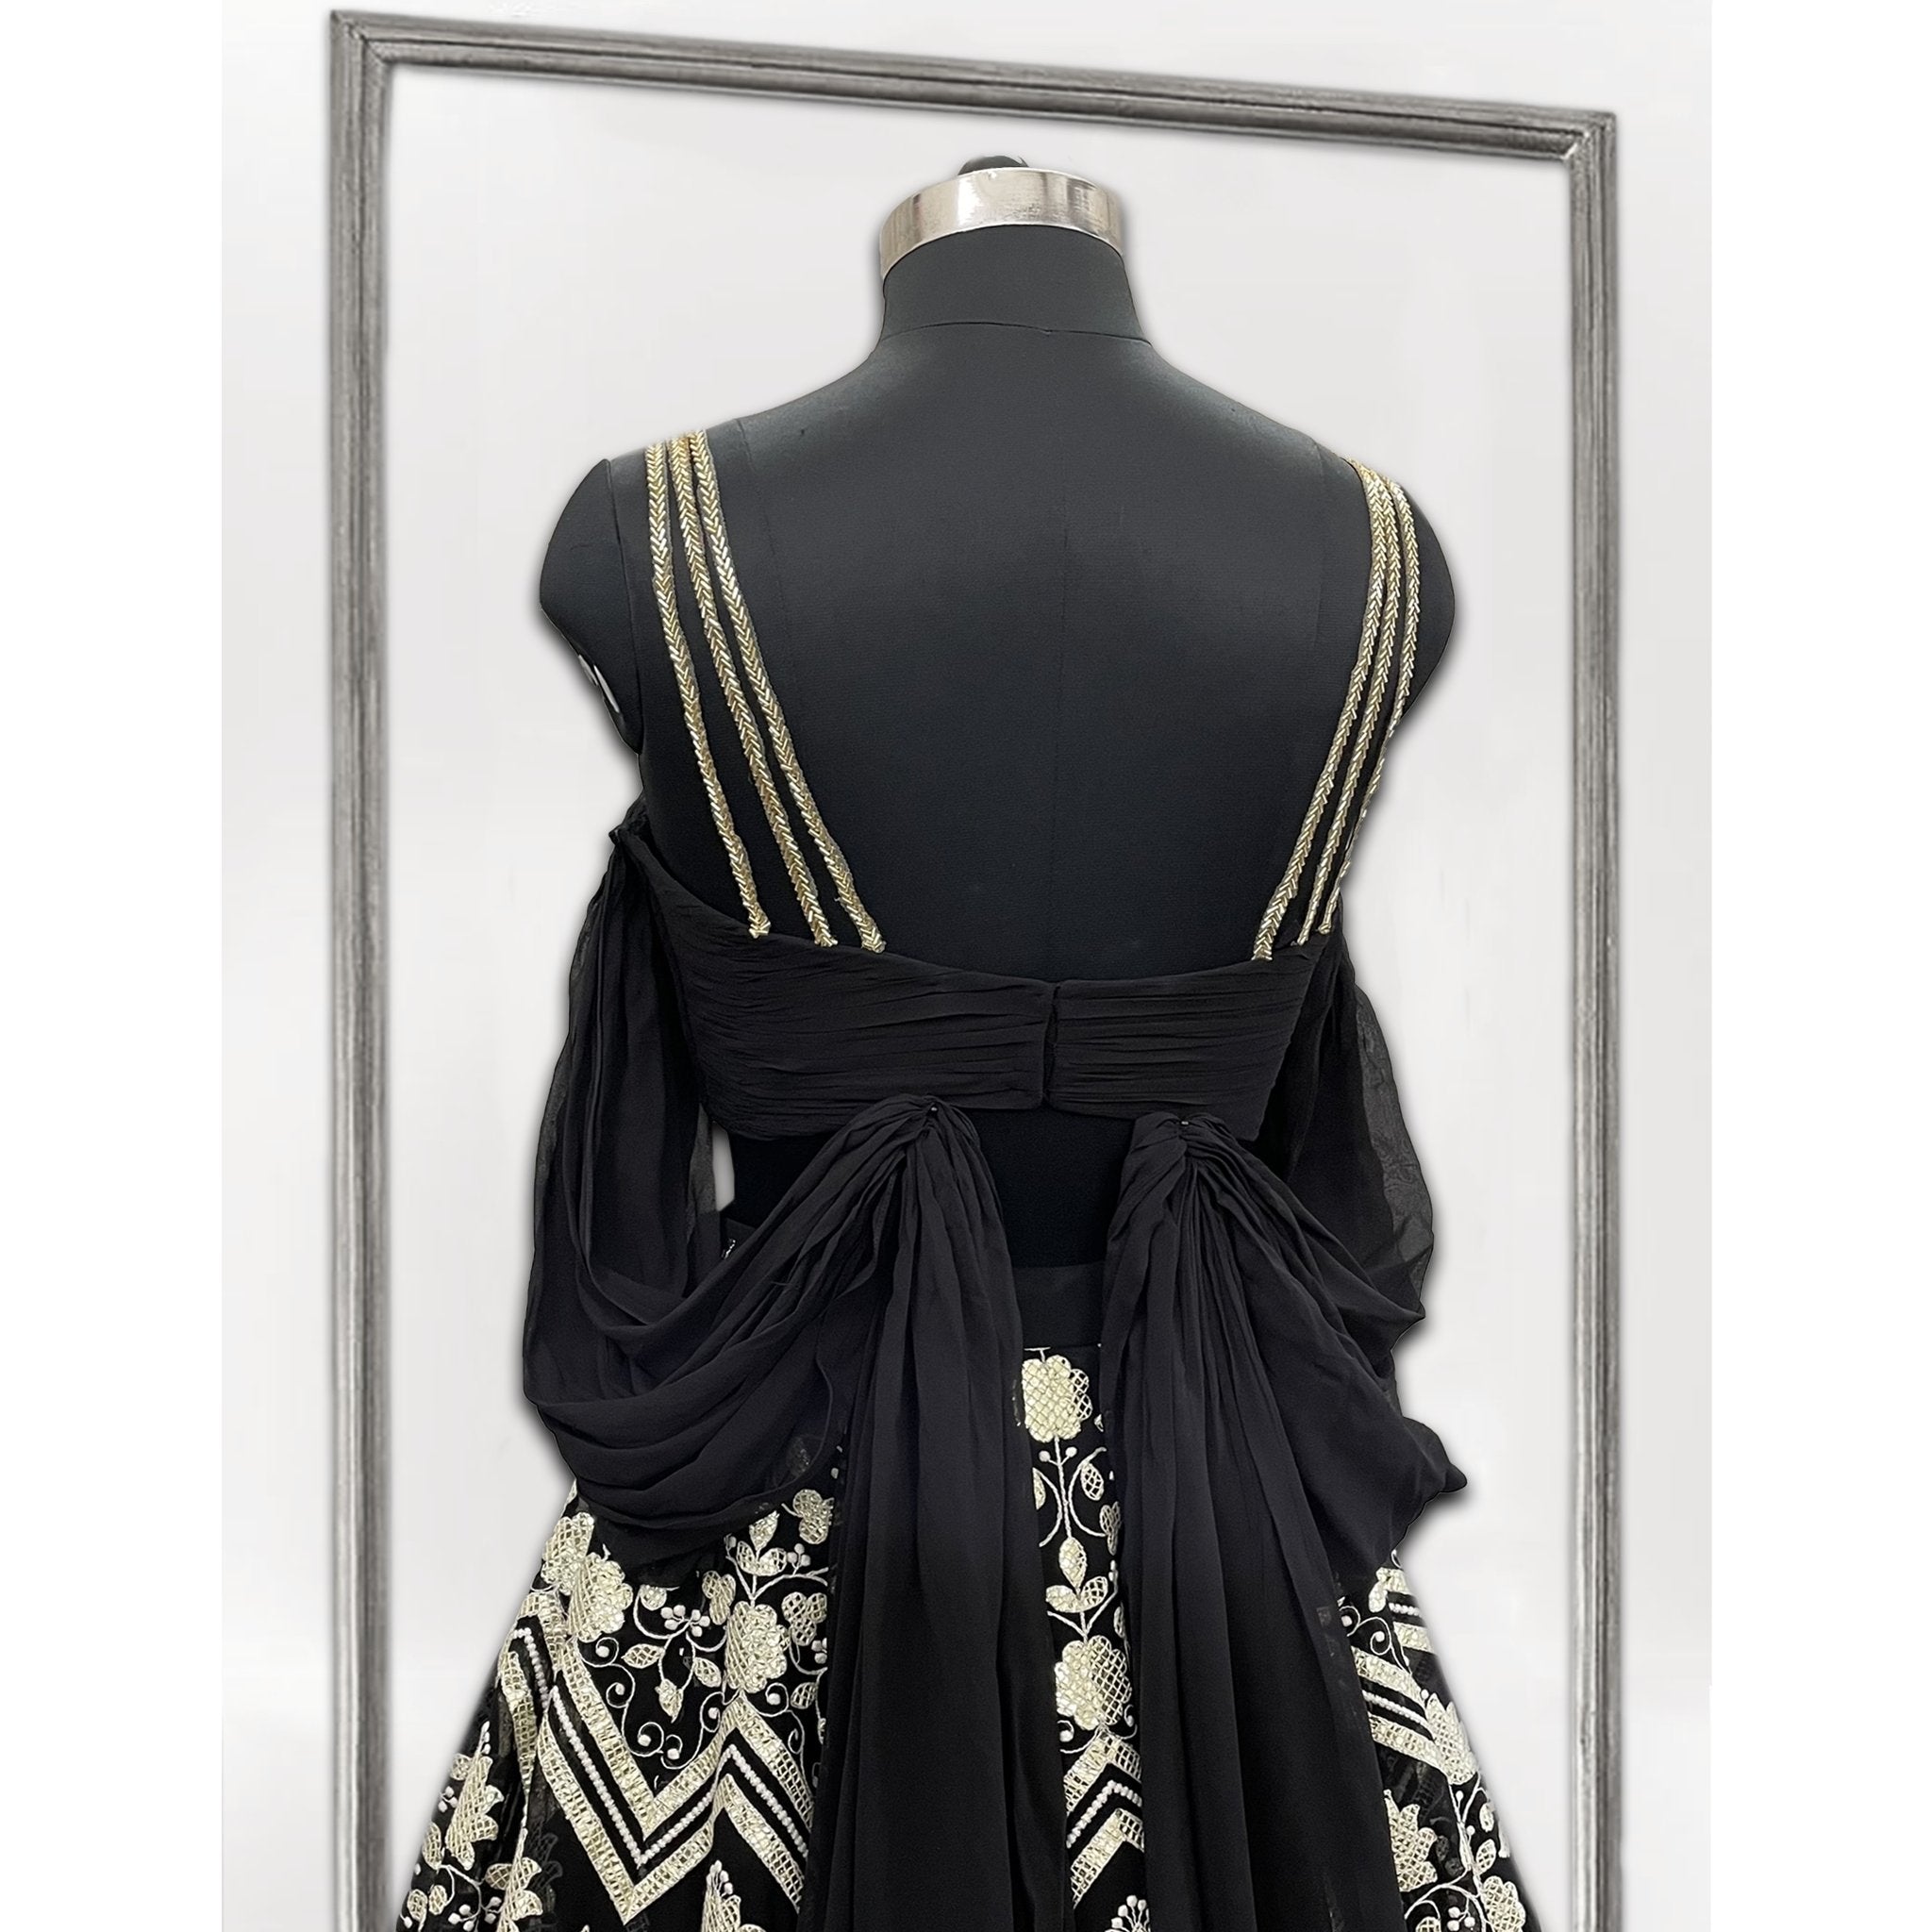 Eclectic Black Lehenga with Draped blouse - Indian Designer Bridal Wedding Outfit